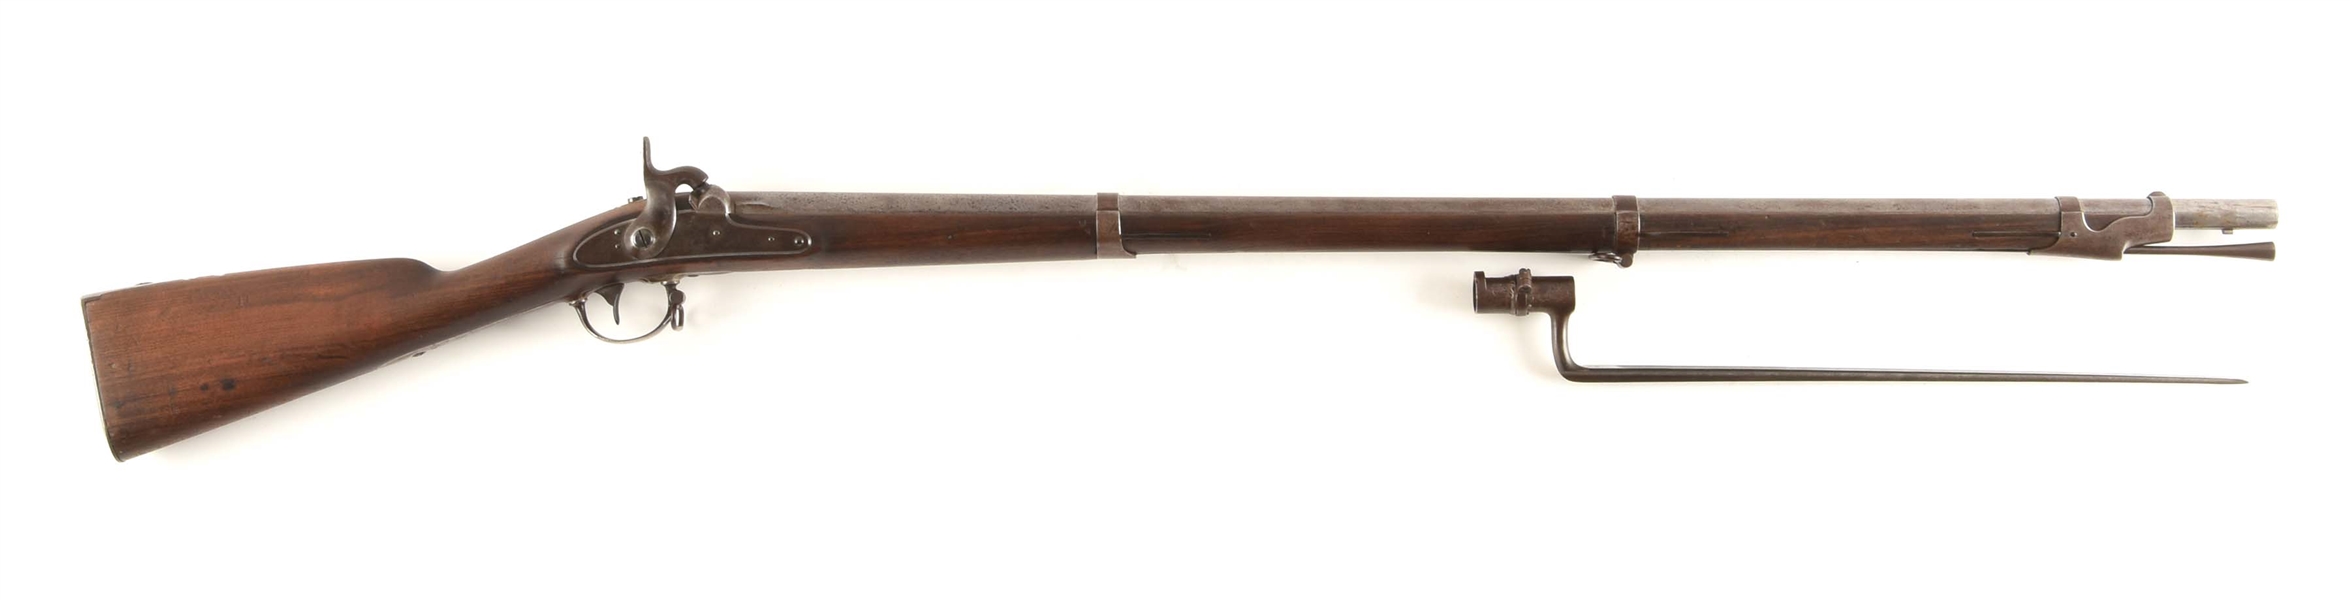 (A) SPRINGFIELD 1842 MUSKET WITH BAYONET (1844).